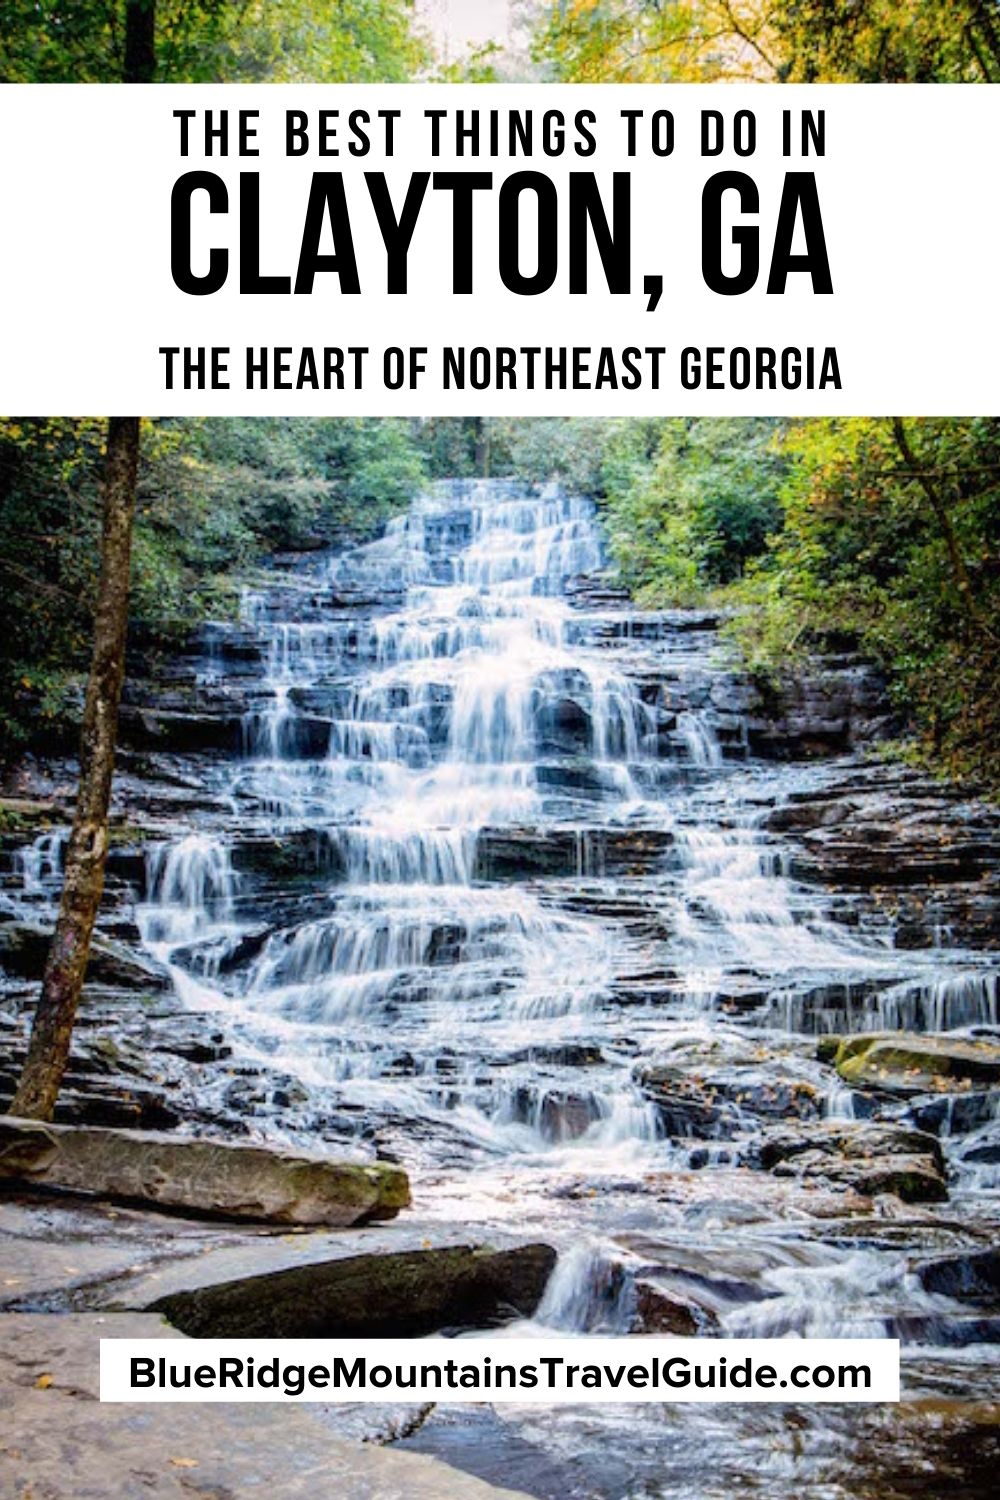 The 20 Best Things to Do in Clayton, GA (the Gem of Northeast Georgia)